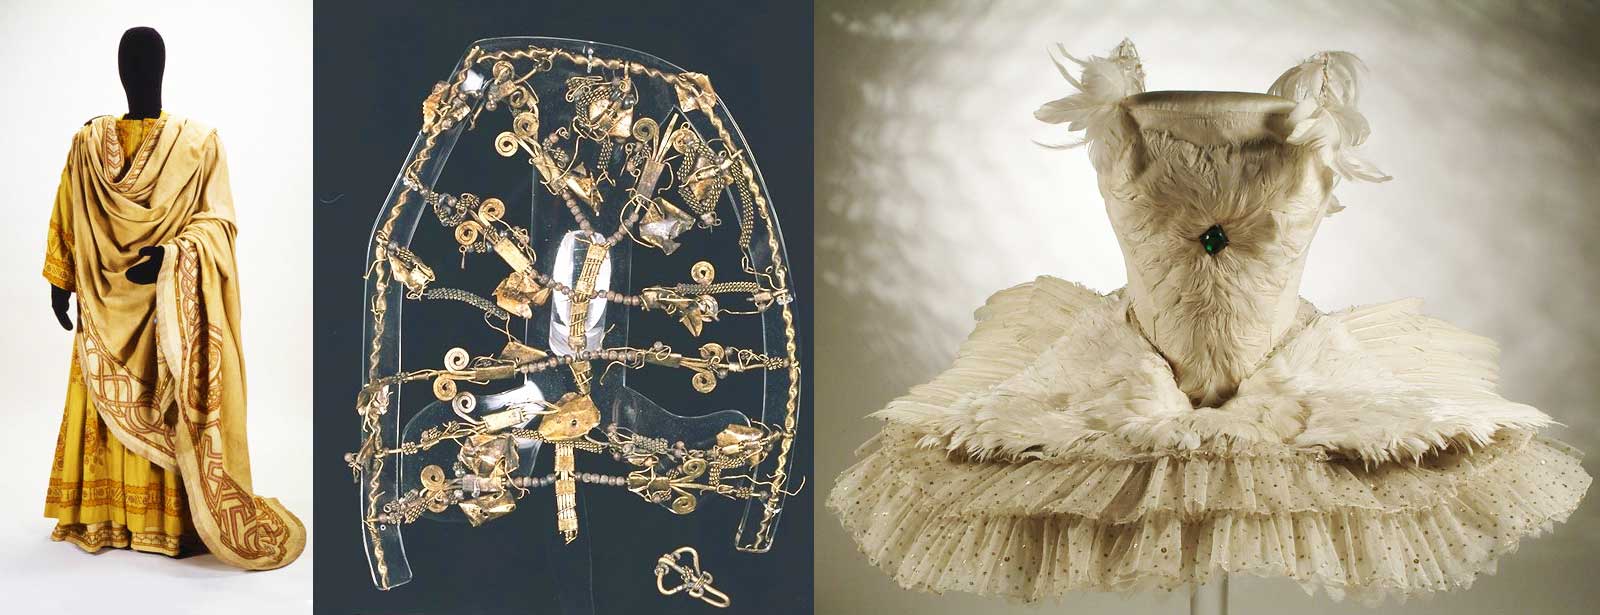 Theatre costumes worn by Henry Irving, an elaborate copper alloy wire headdress and the costume worn by Anna Pavlova in The Dying Swan